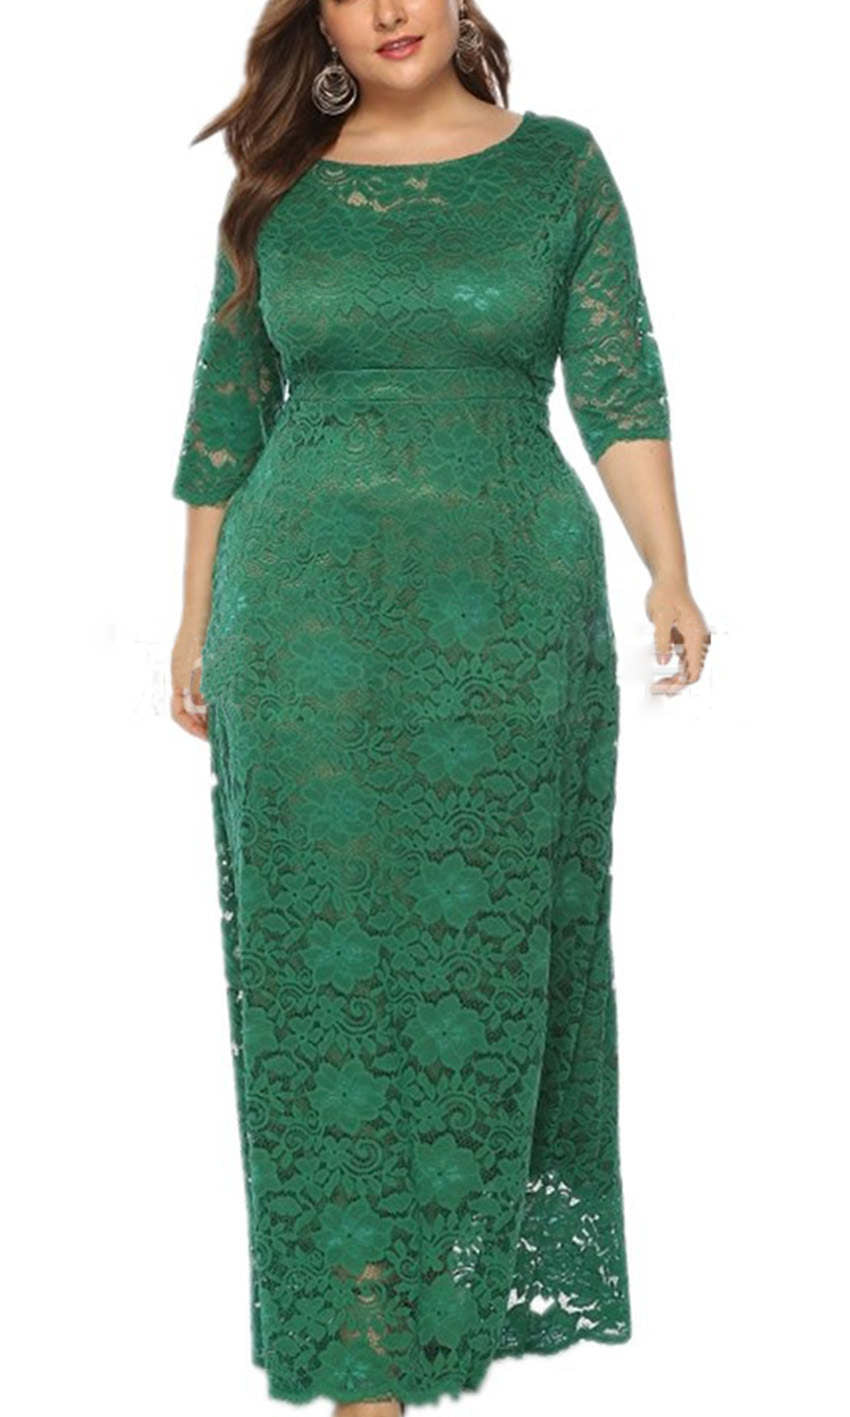 Green Long Sleeves Lace Bridesmaid Dresses with Empire Waist P578